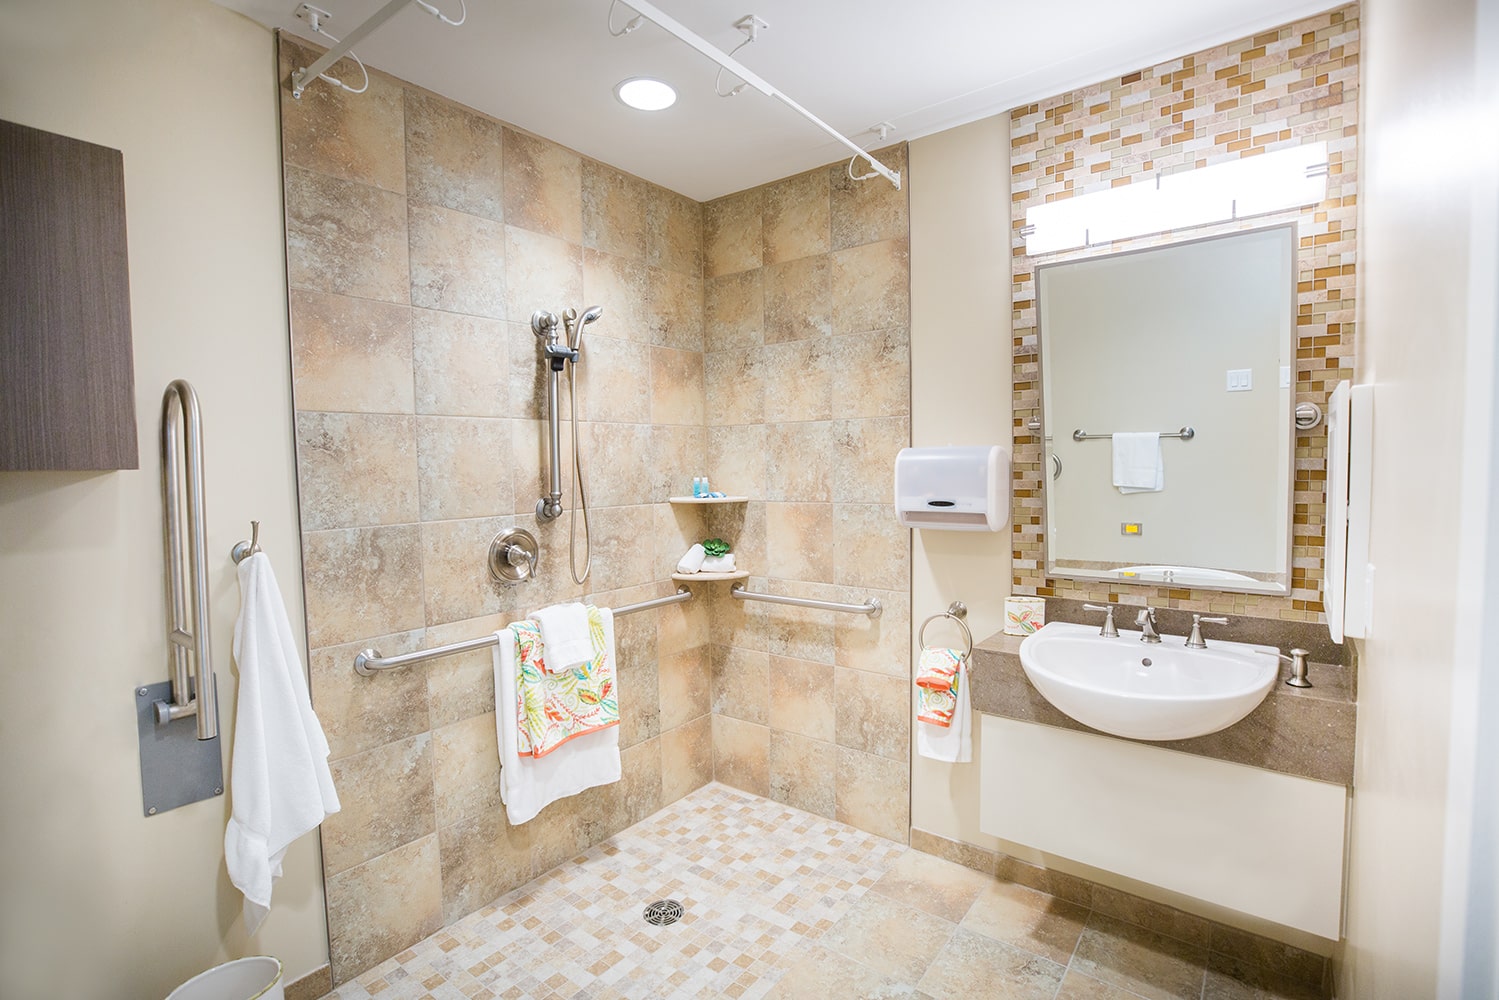 Bathroom with a shower and sink with brown tiles and grab bars in the shower